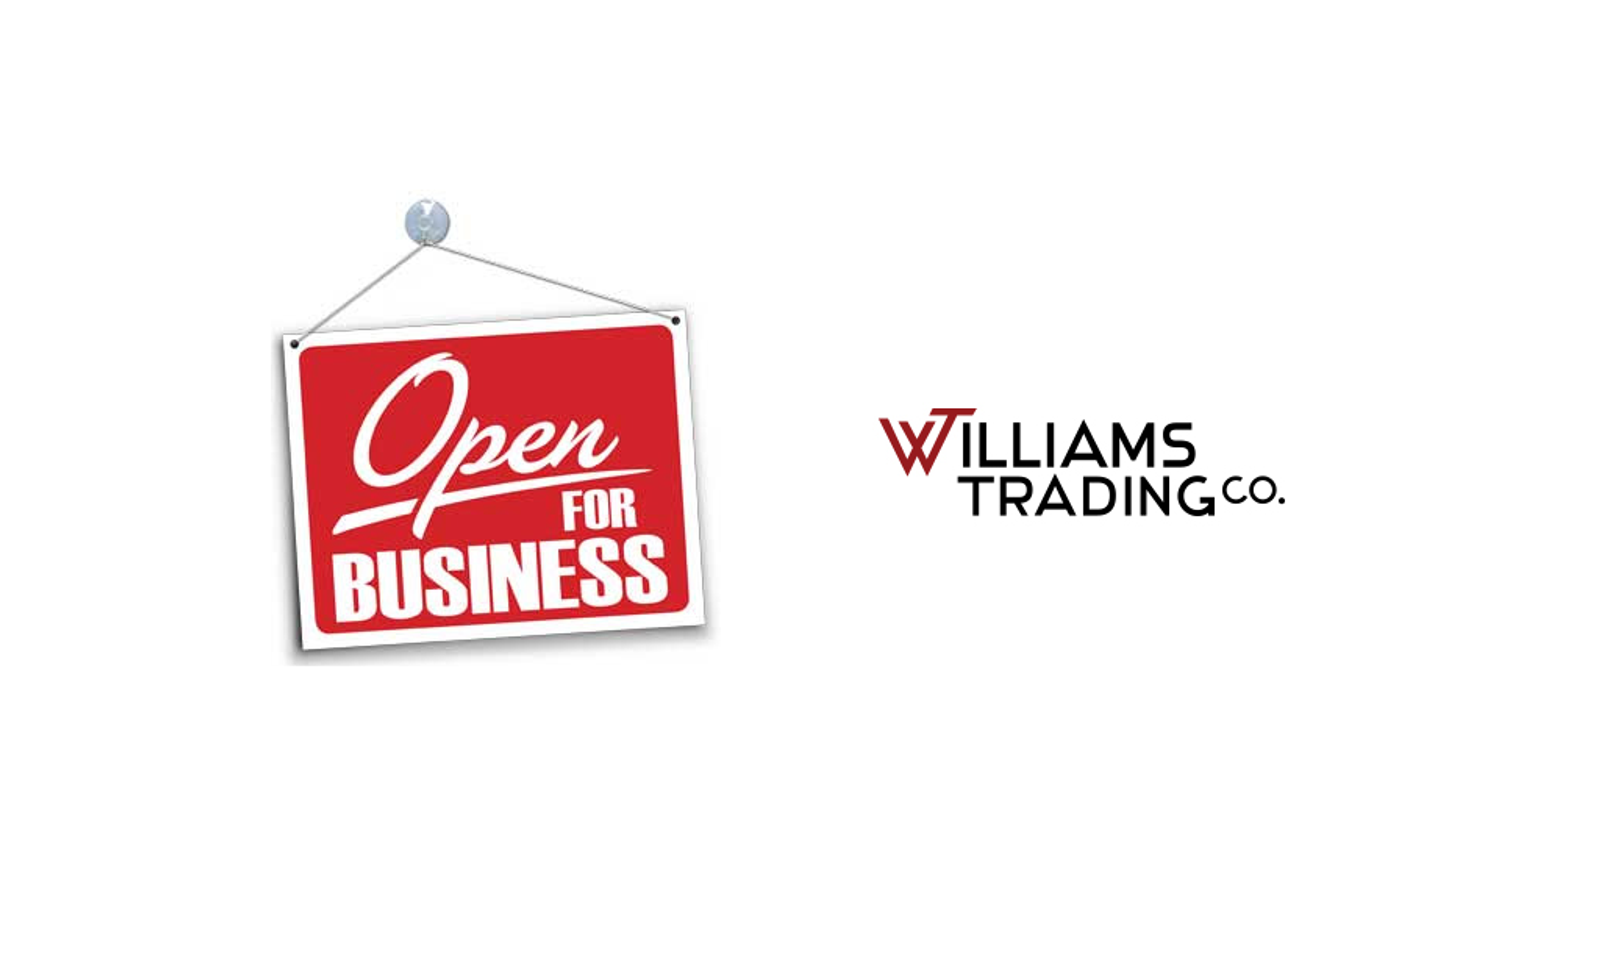 Williams Trading Co. to Re-Open Next Week With Limited Staffing